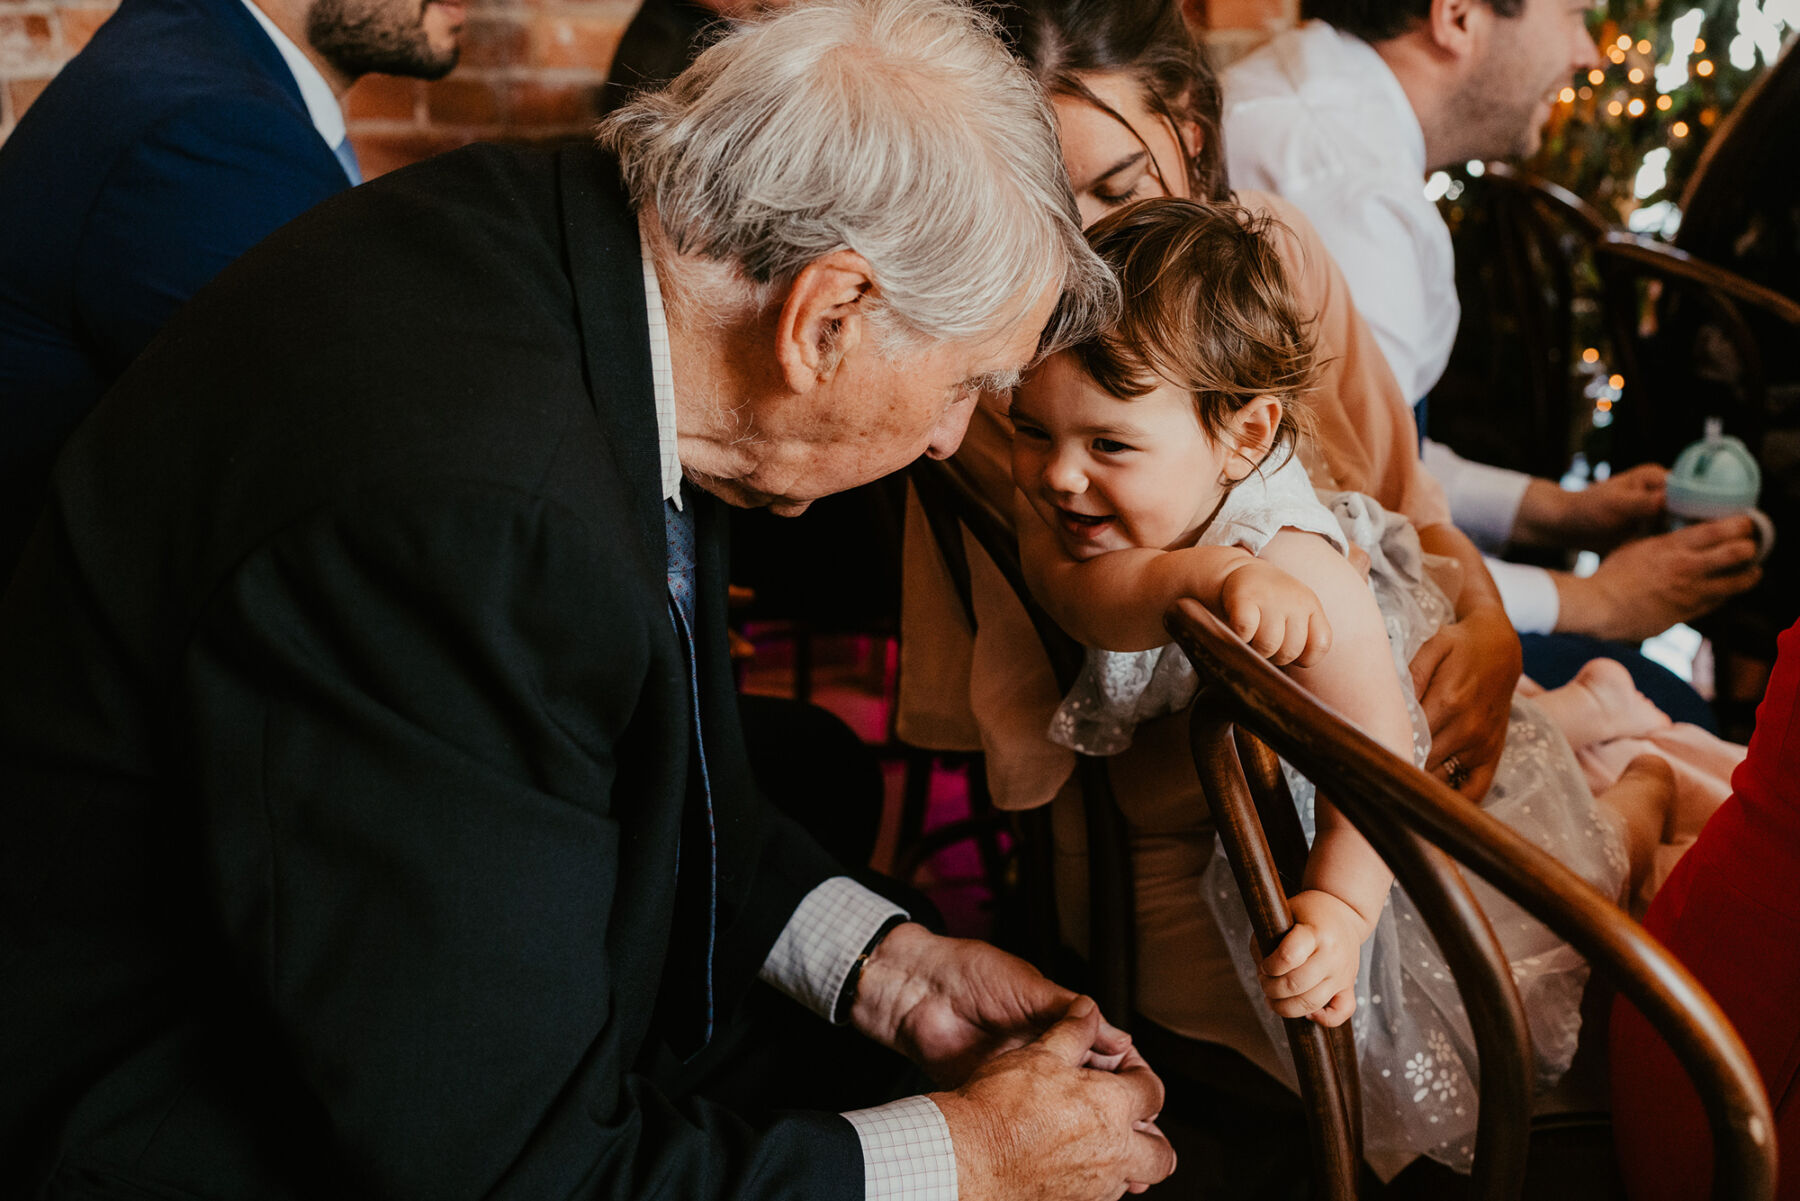 Elderly wedding guests bending forward to interact with baby wedding guest.